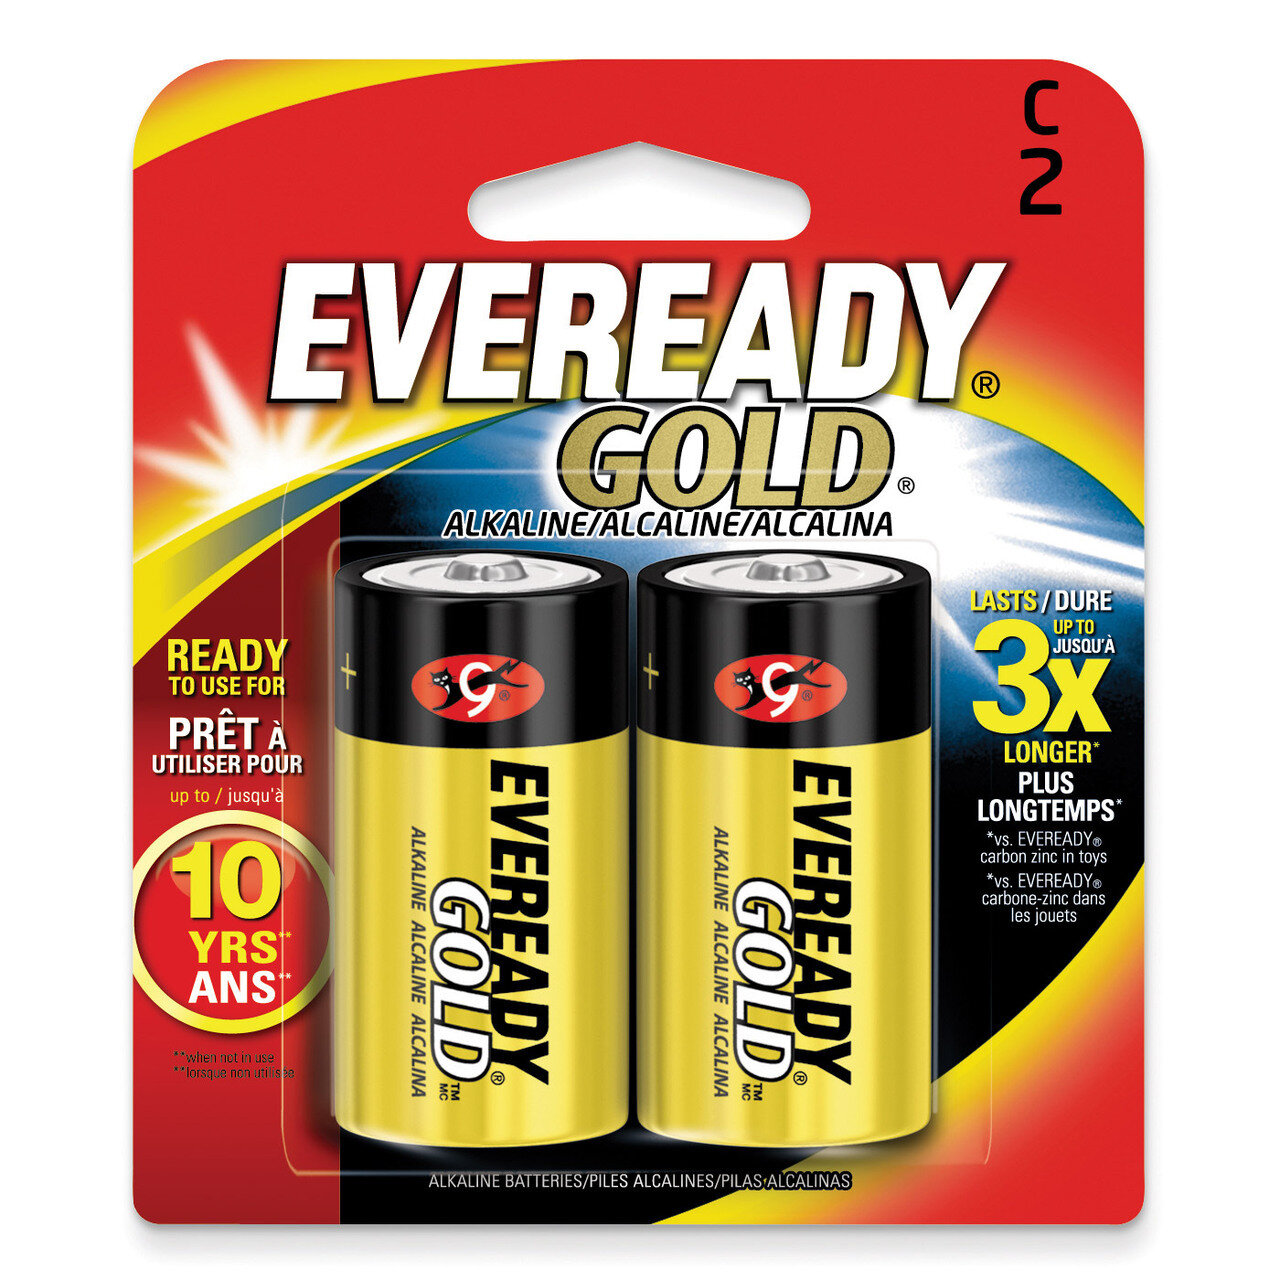 (2) Pack of Eveready Gold C Batteries WBC